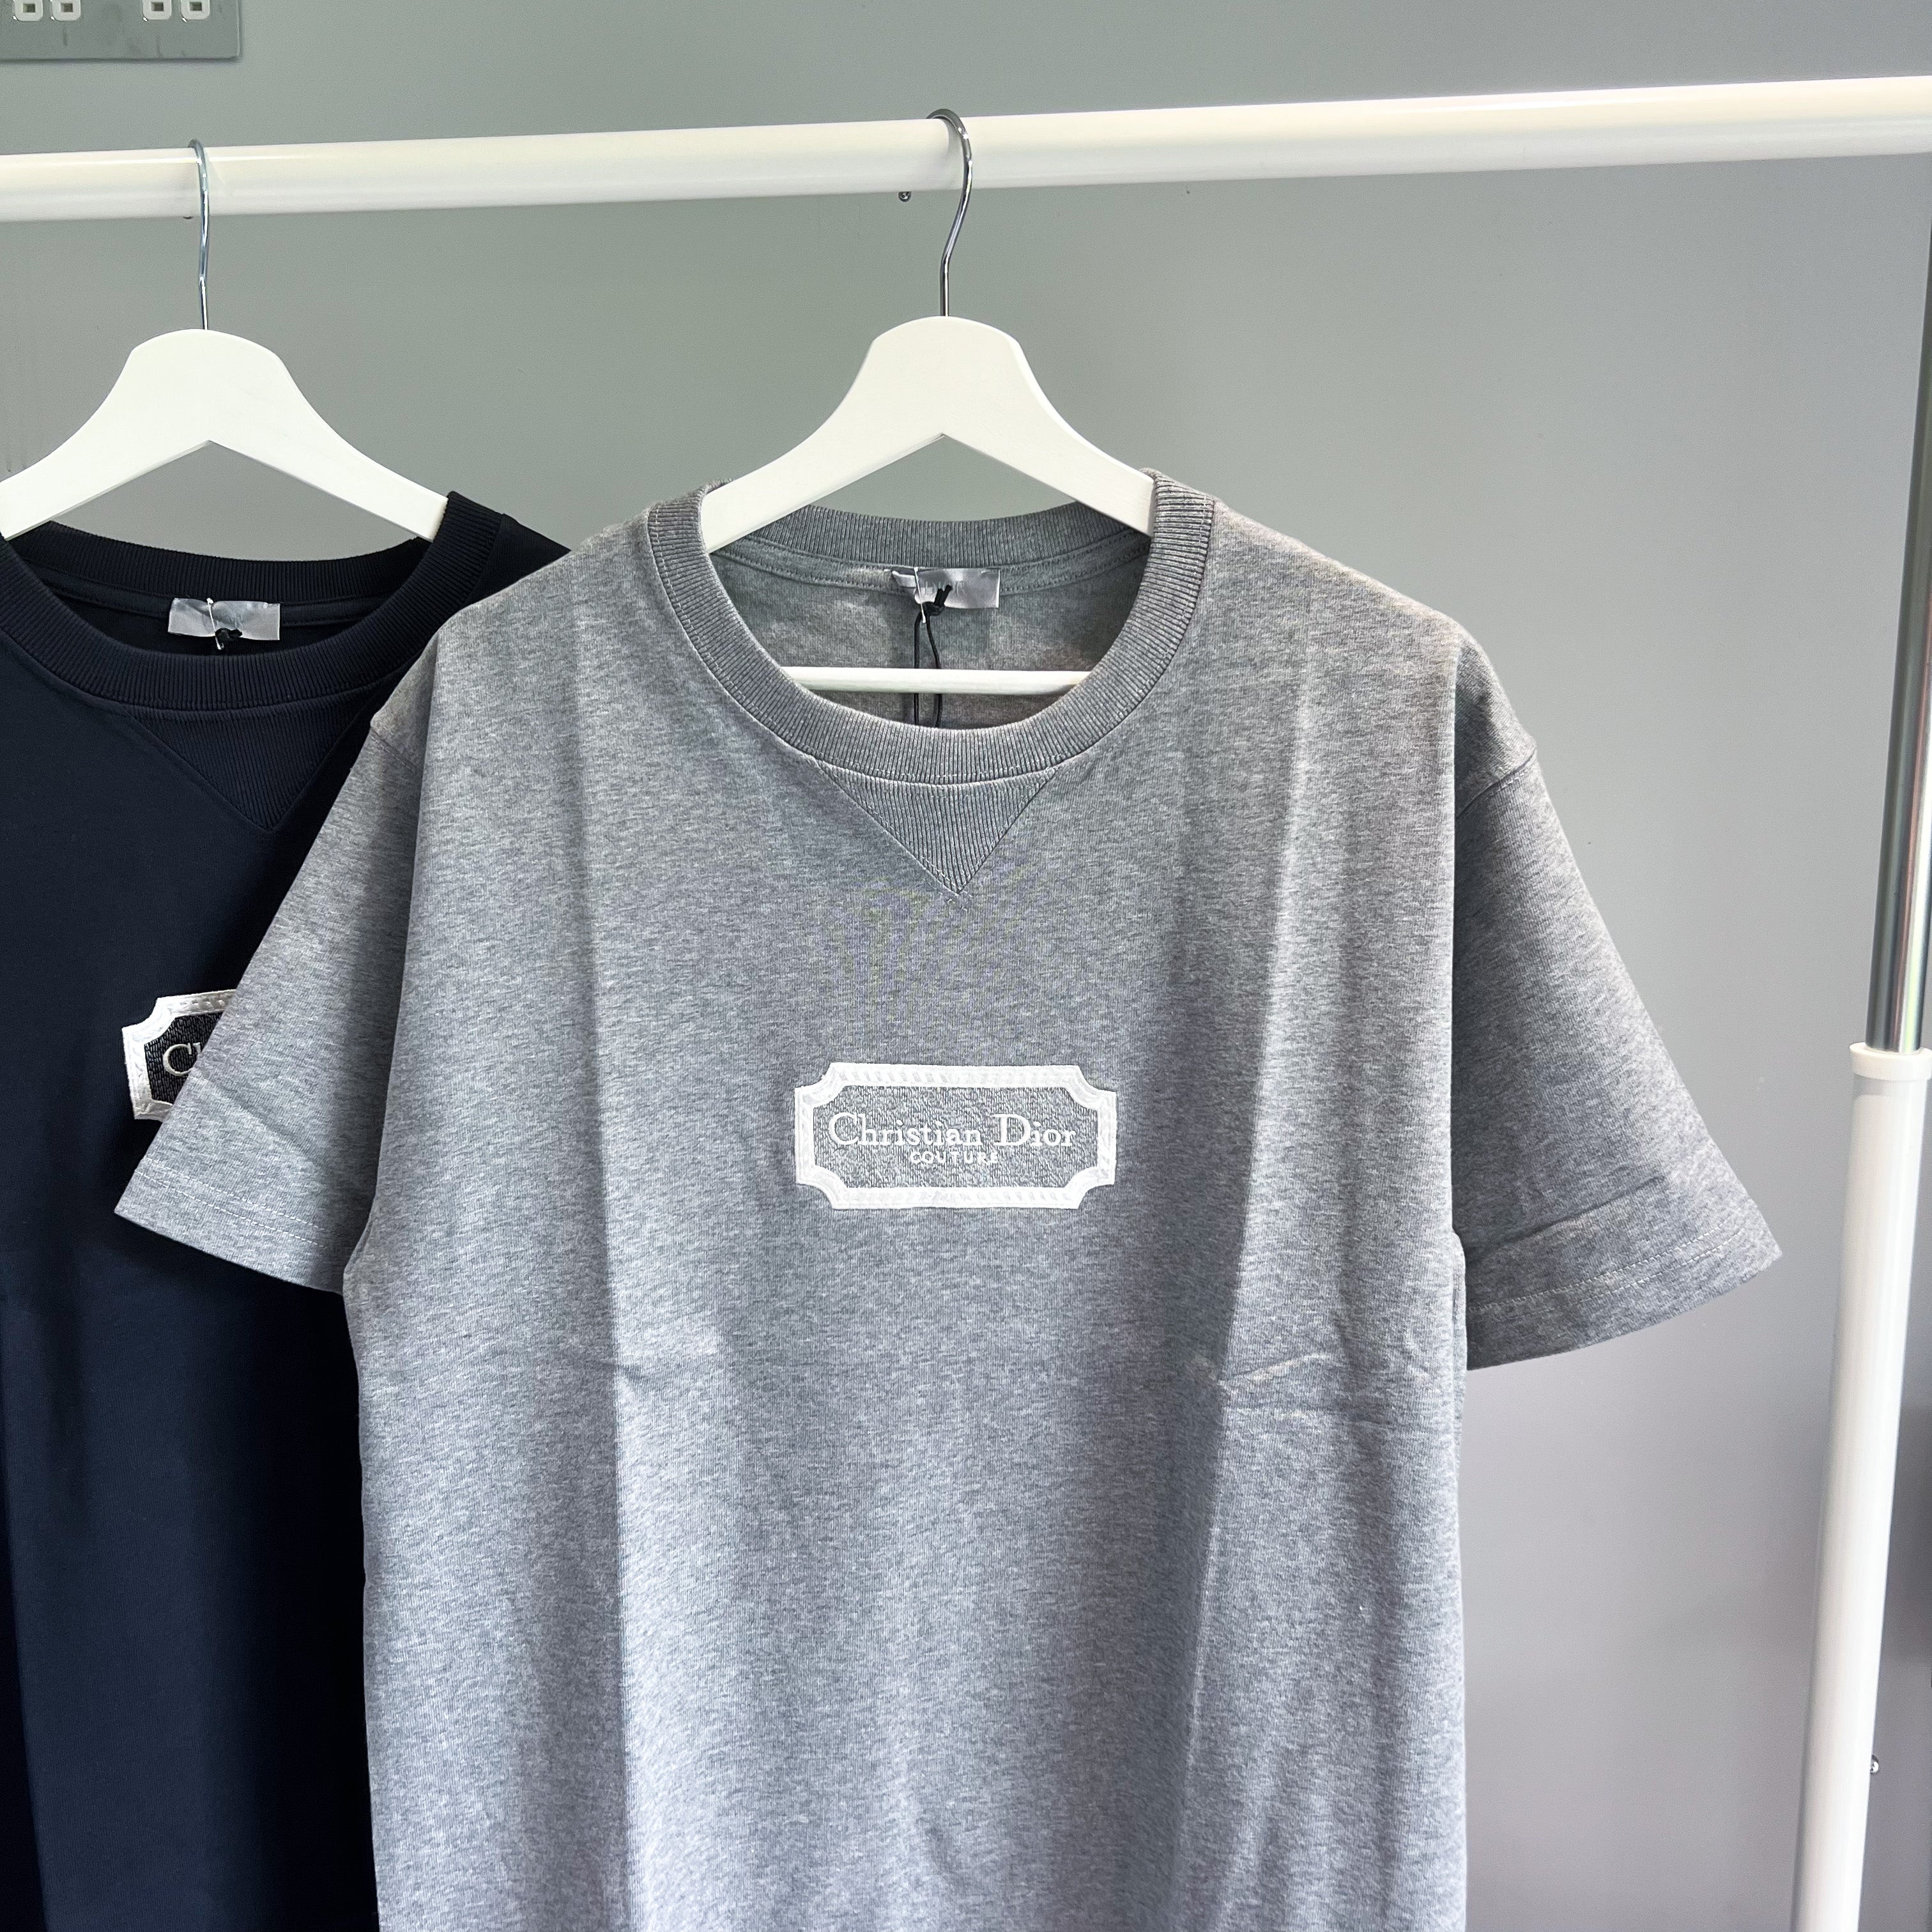 CD COUTURE T-SHIRT, RELAXED FIT - Luxe Finds UK